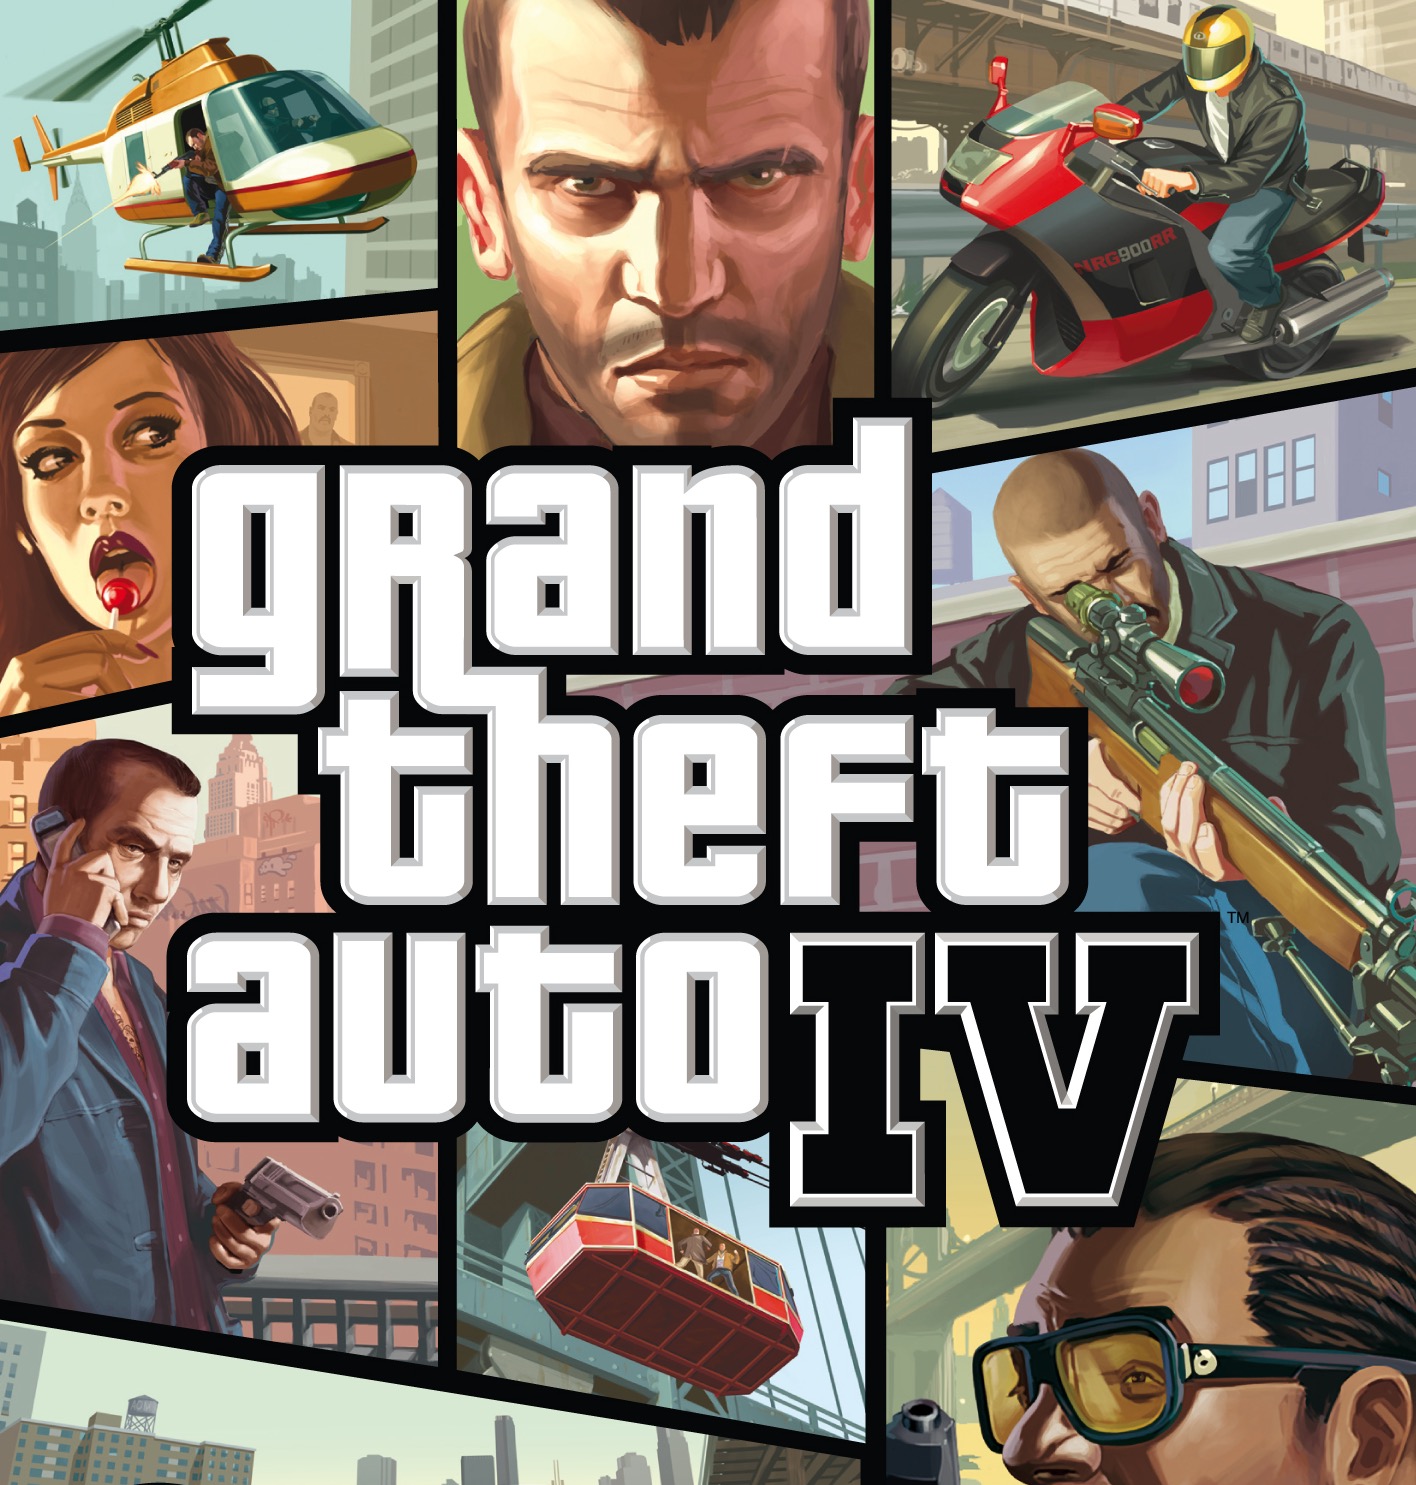 Head back to Liberty City in 'GTA IV' on Xbox One